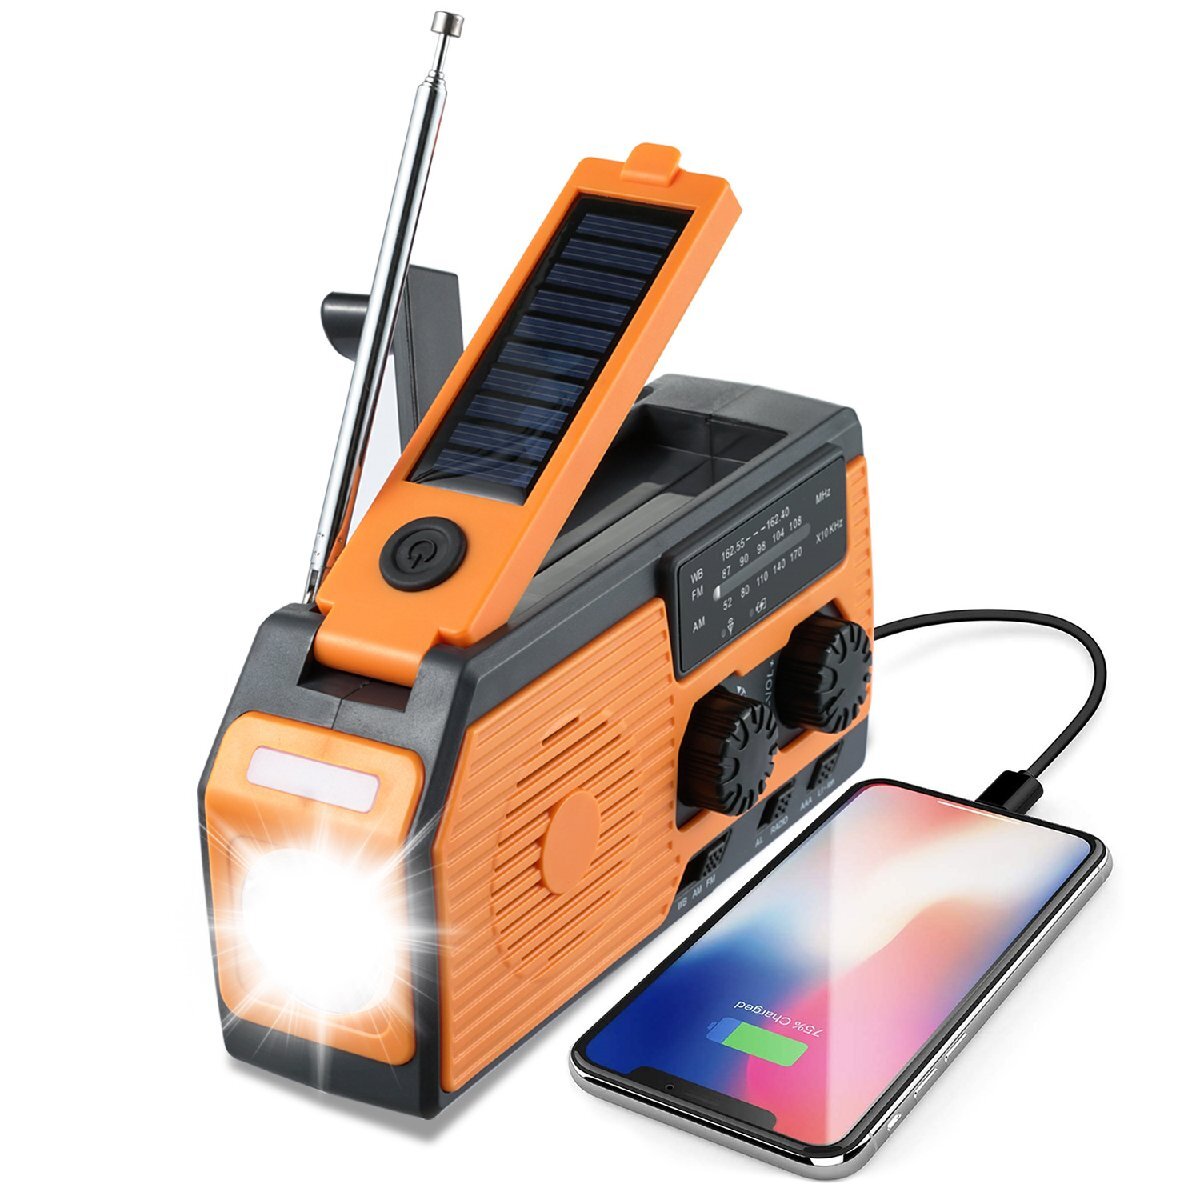  multifunction disaster prevention radio hand turning small size mobile waterproof high luminance flashlight radio USB charge AM/FM/NOAA weather radio camp earthquake tsunami 151 disaster prevention supplies 